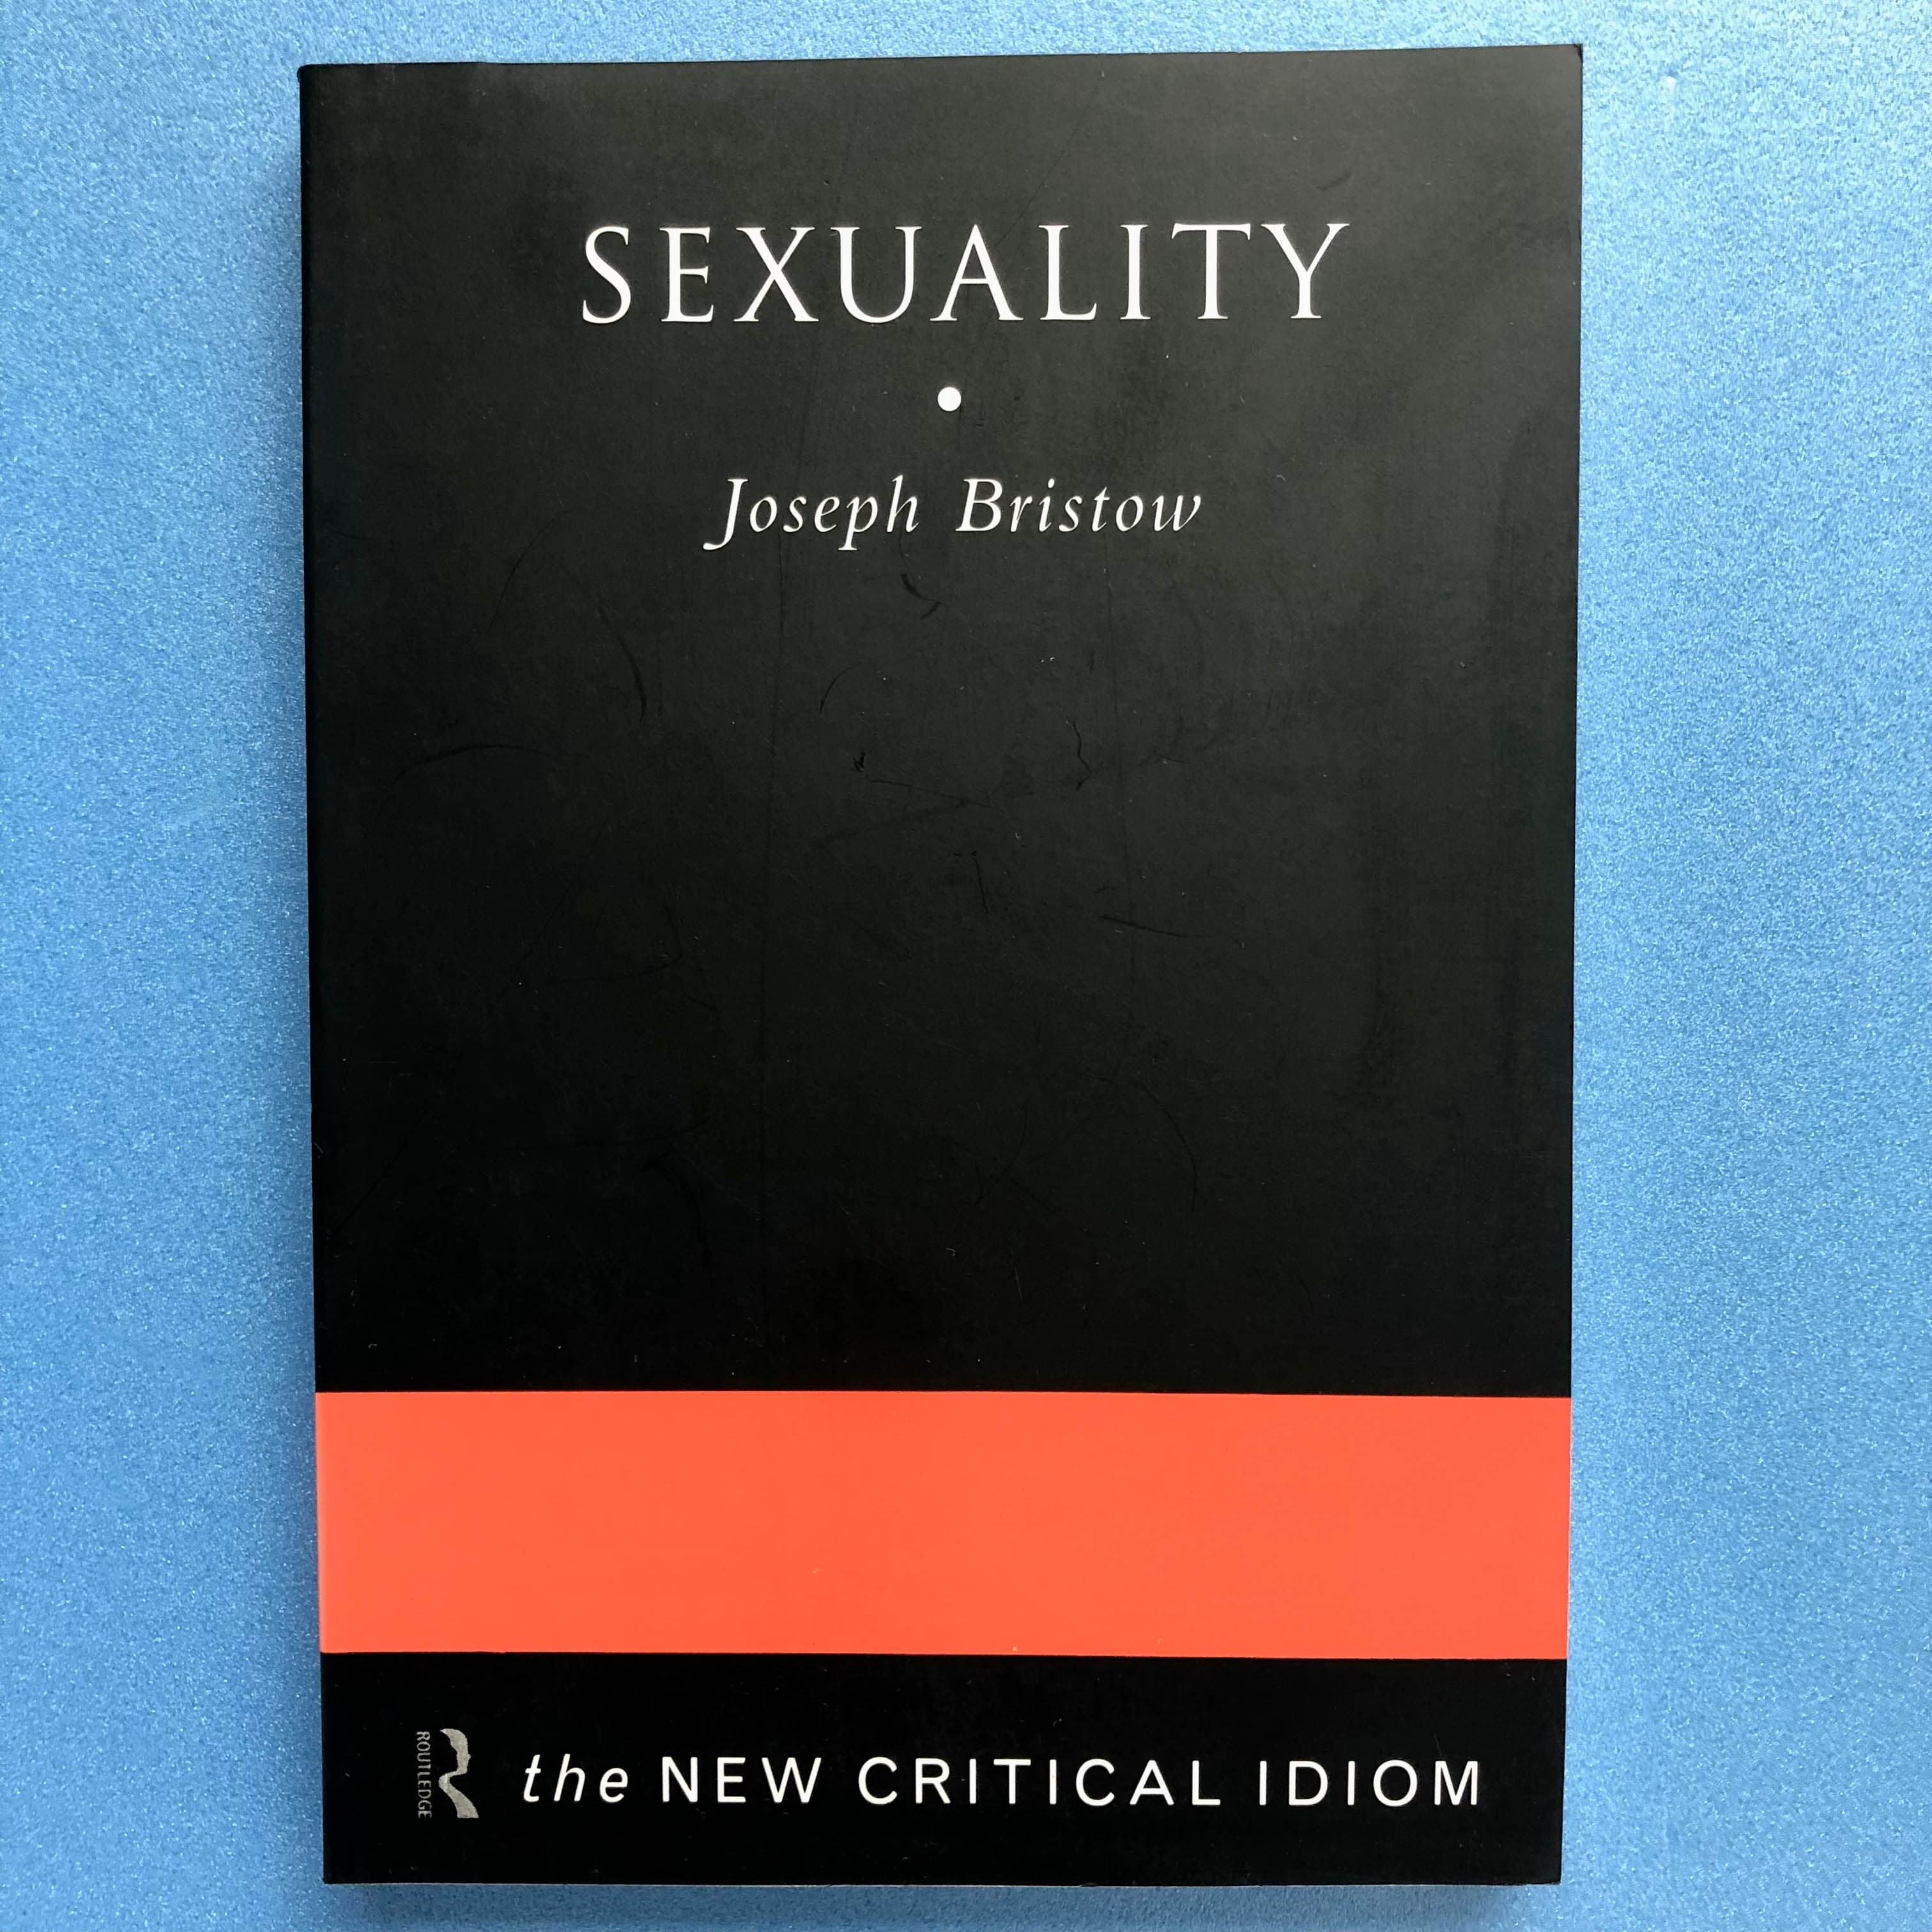 Sexuality (The New Critical Idiom) (Paperback)